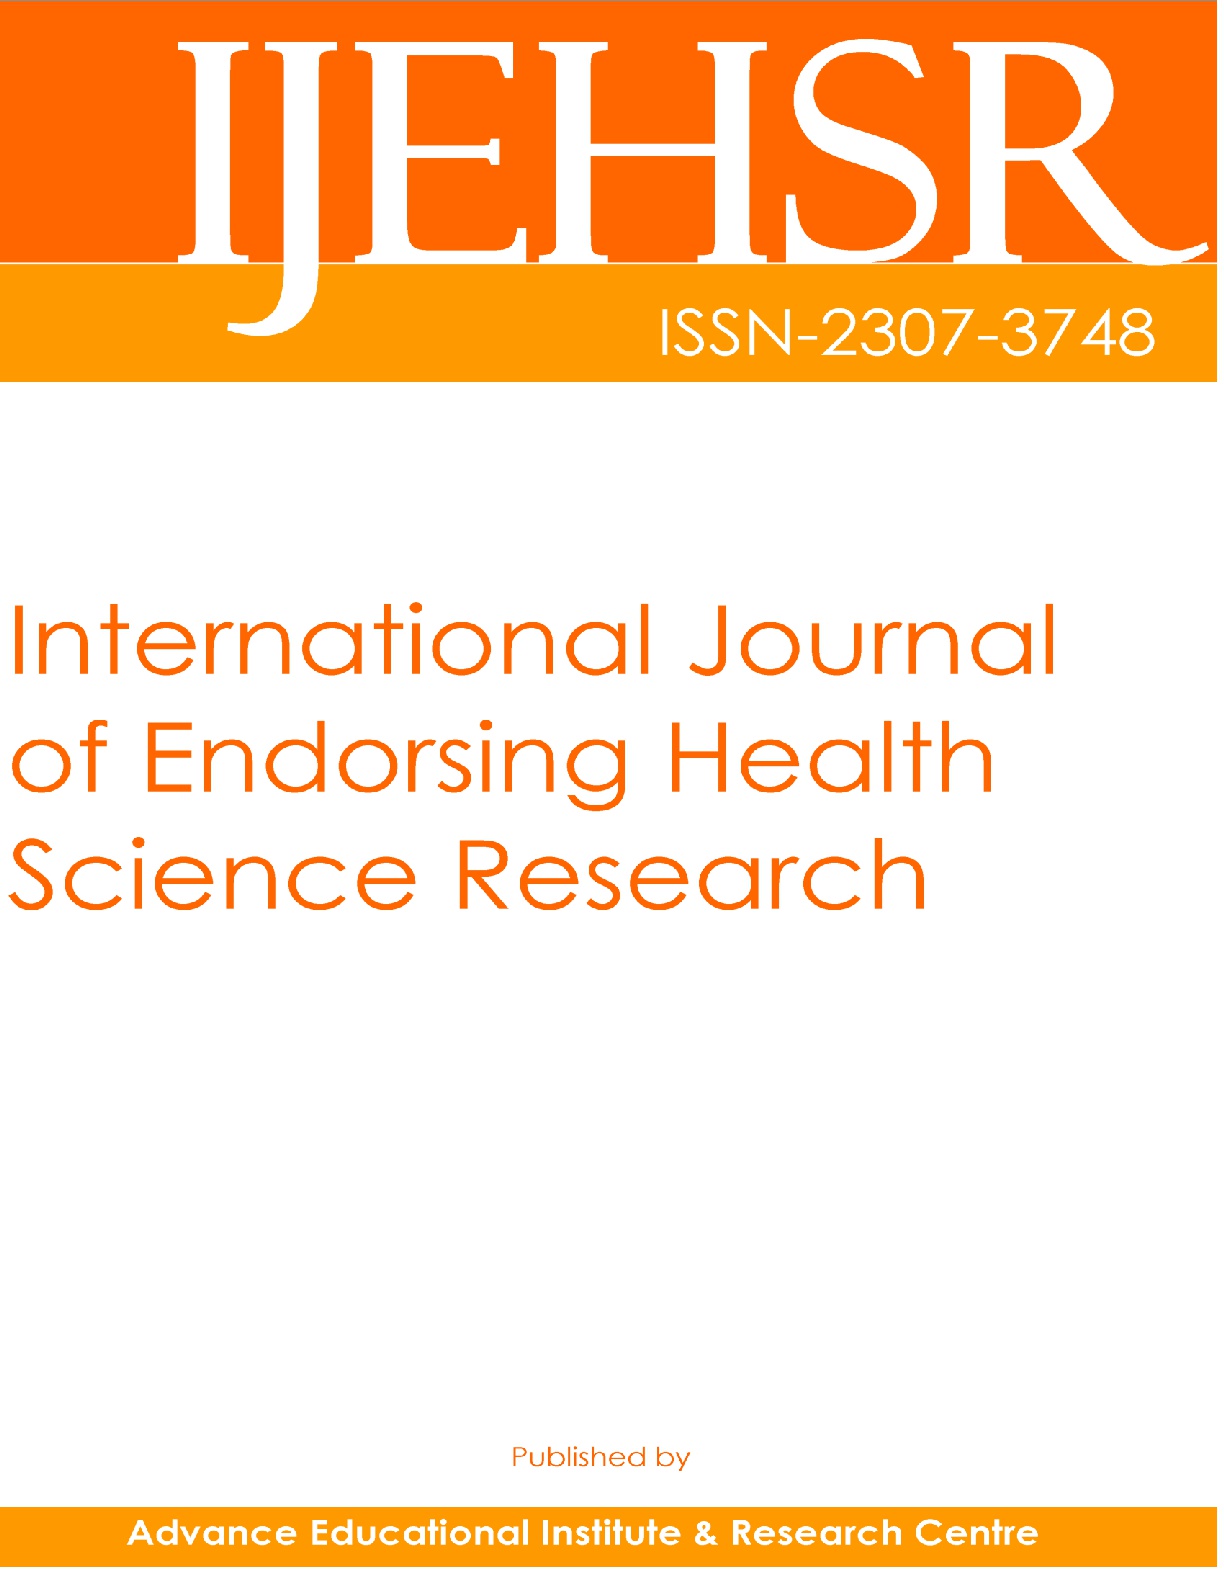 					View Vol. 1 No. 1 (2013): International Journal of Endorsing Health Science Research
				